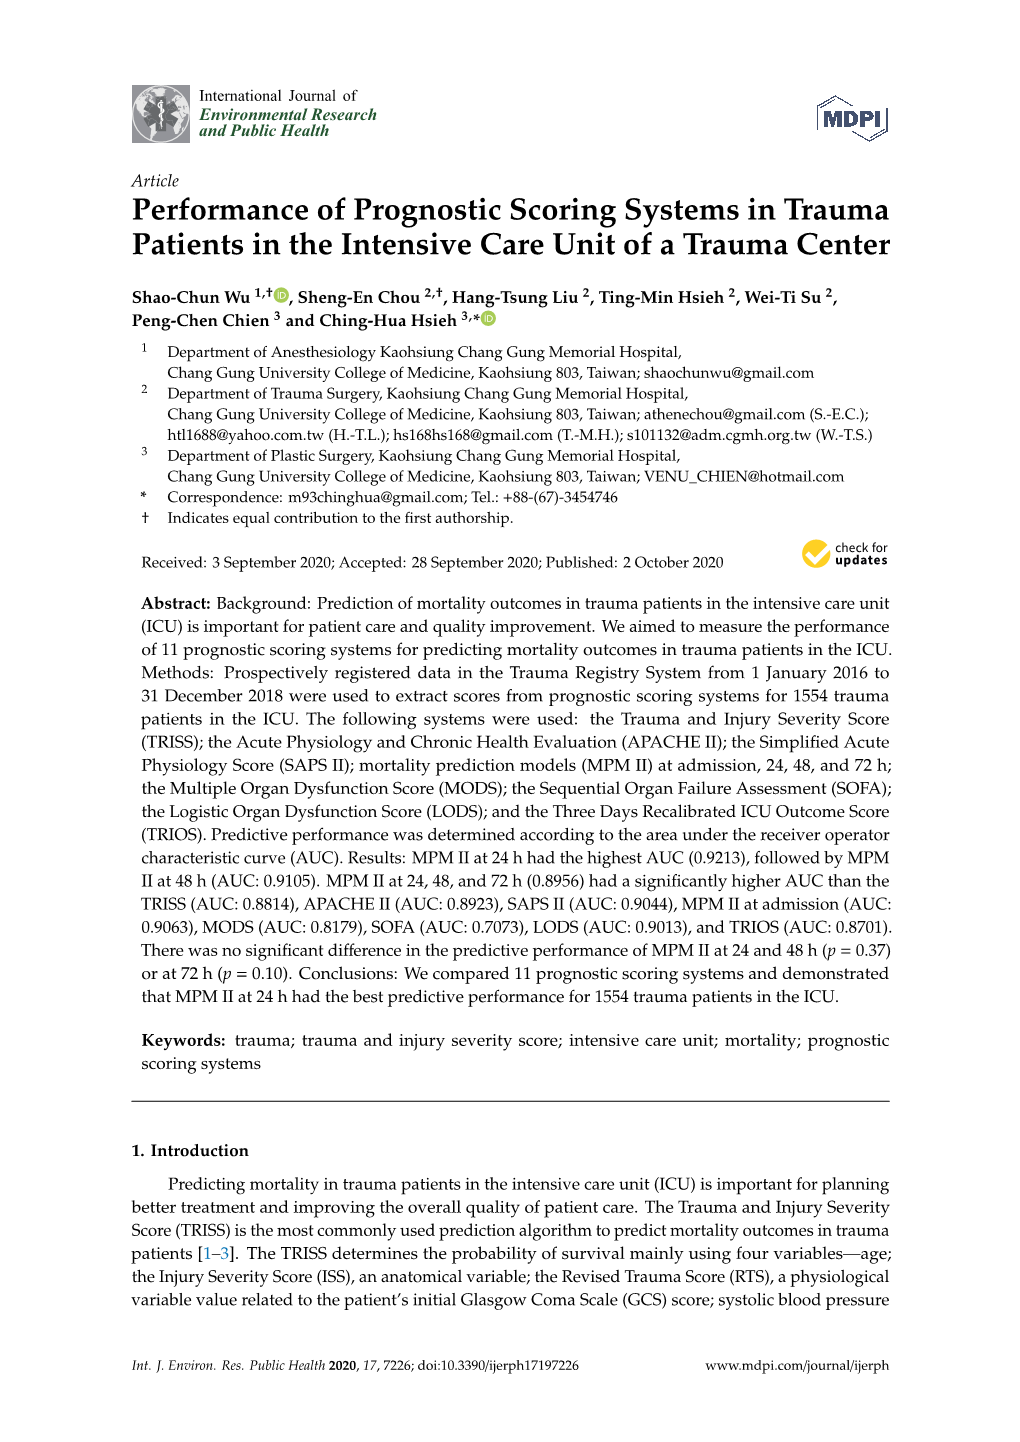 Performance of Prognostic Scoring Systems in Trauma Patients in the Intensive Care Unit of a Trauma Center